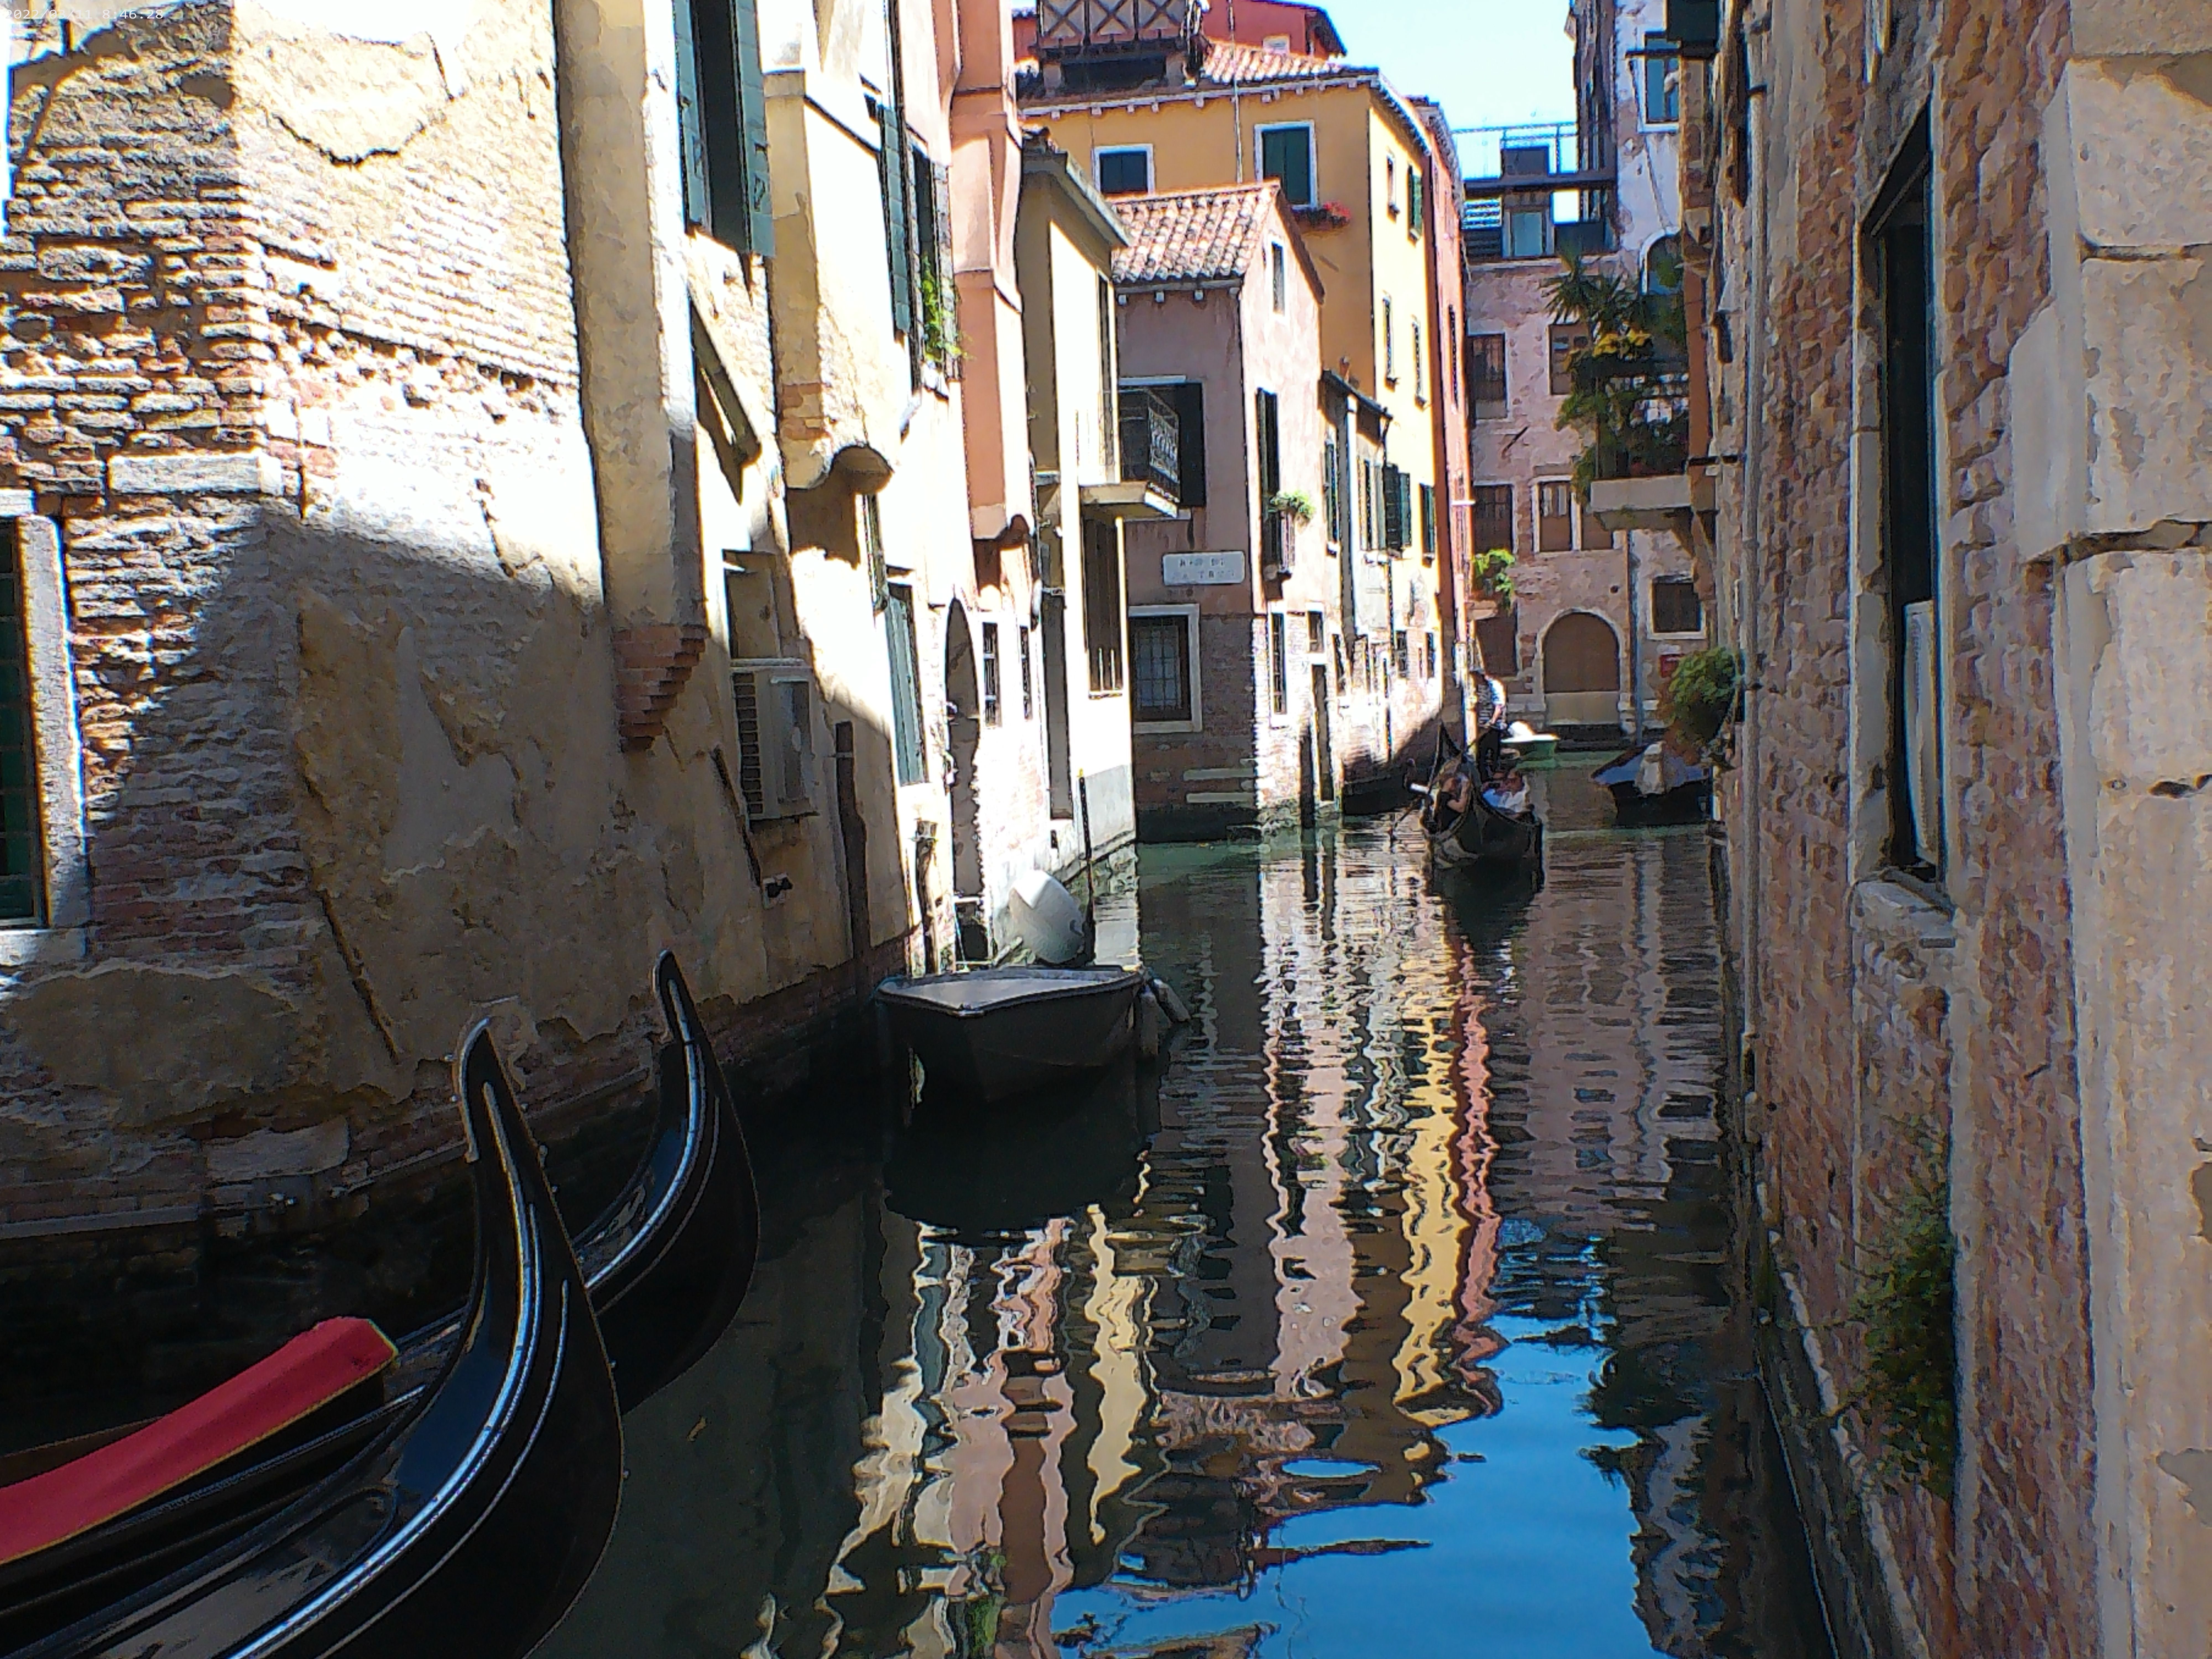 A picture looking down a canal with gondolas